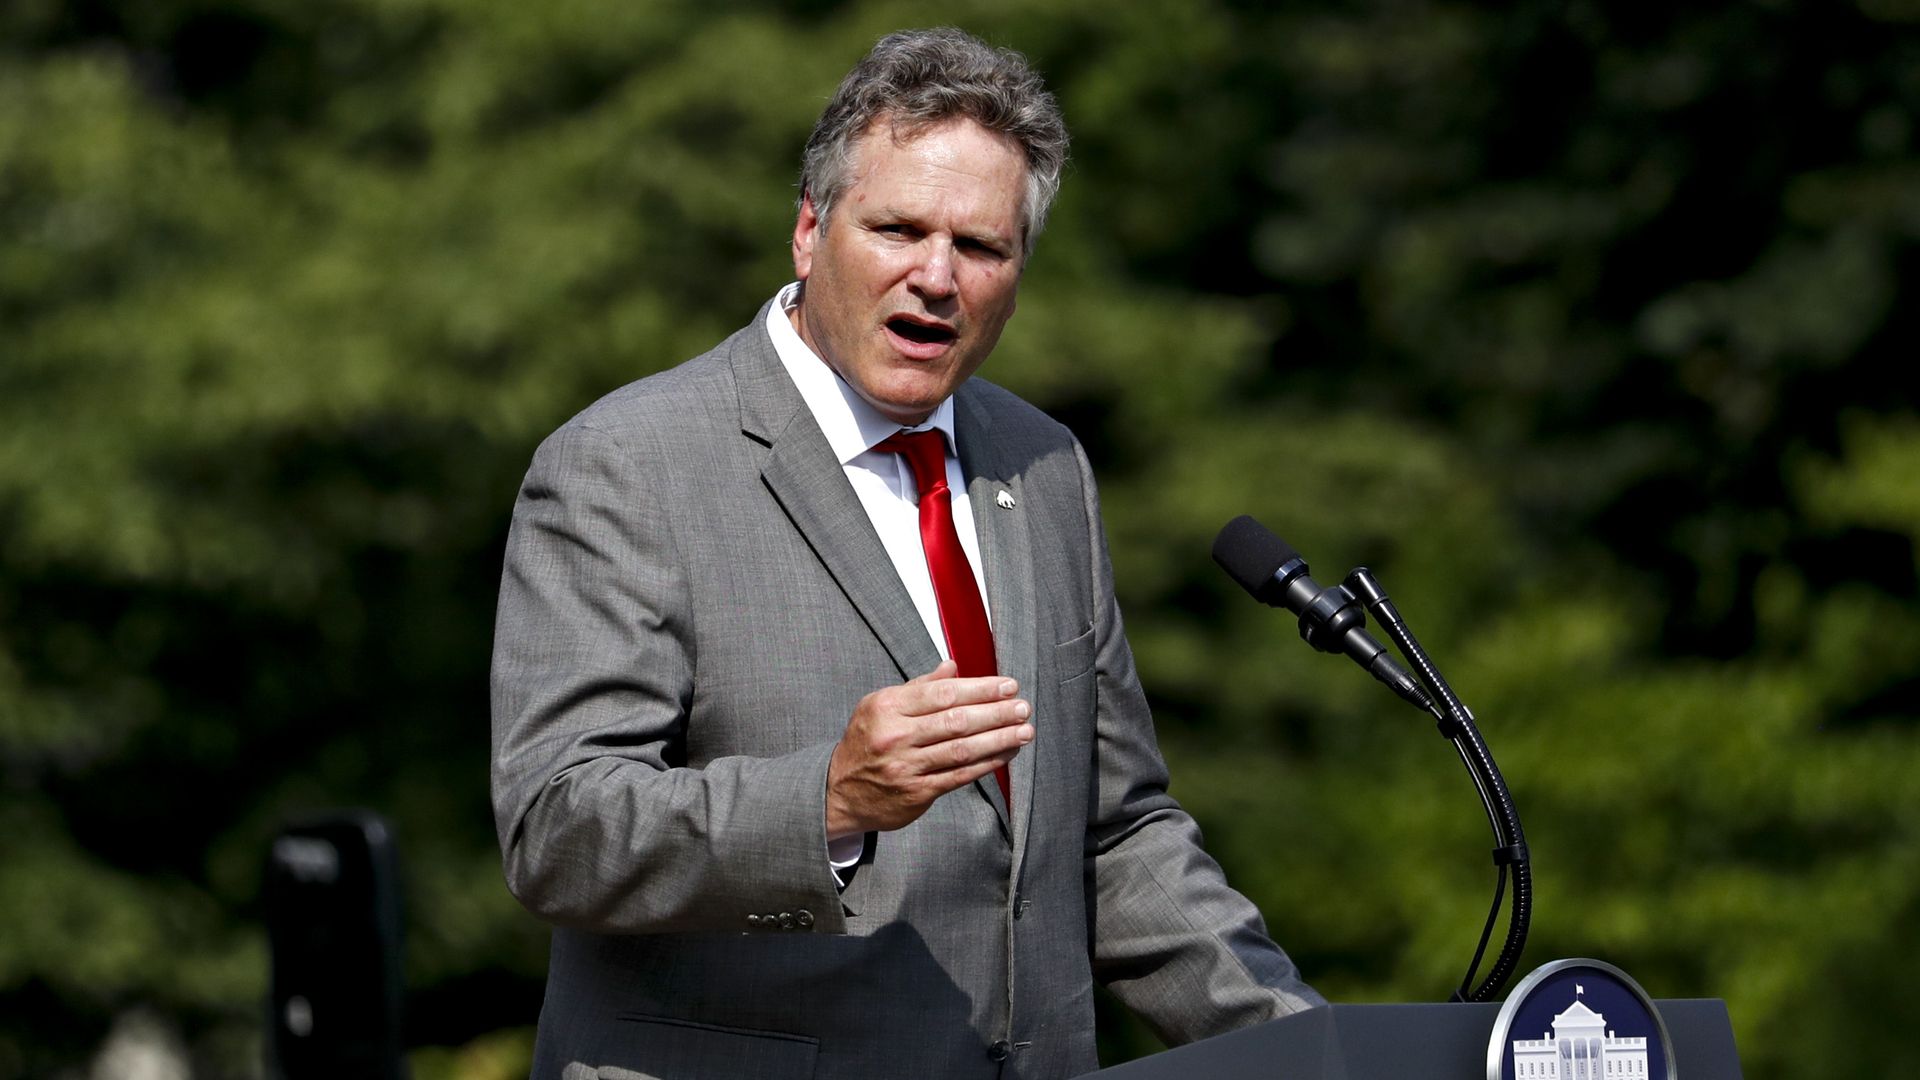 Michael Dunleavy, governor of Alaska, speaks during an event on the South Lawn of the White House in Washington, D.C., U.S. on Thursday, July 16, 2020.